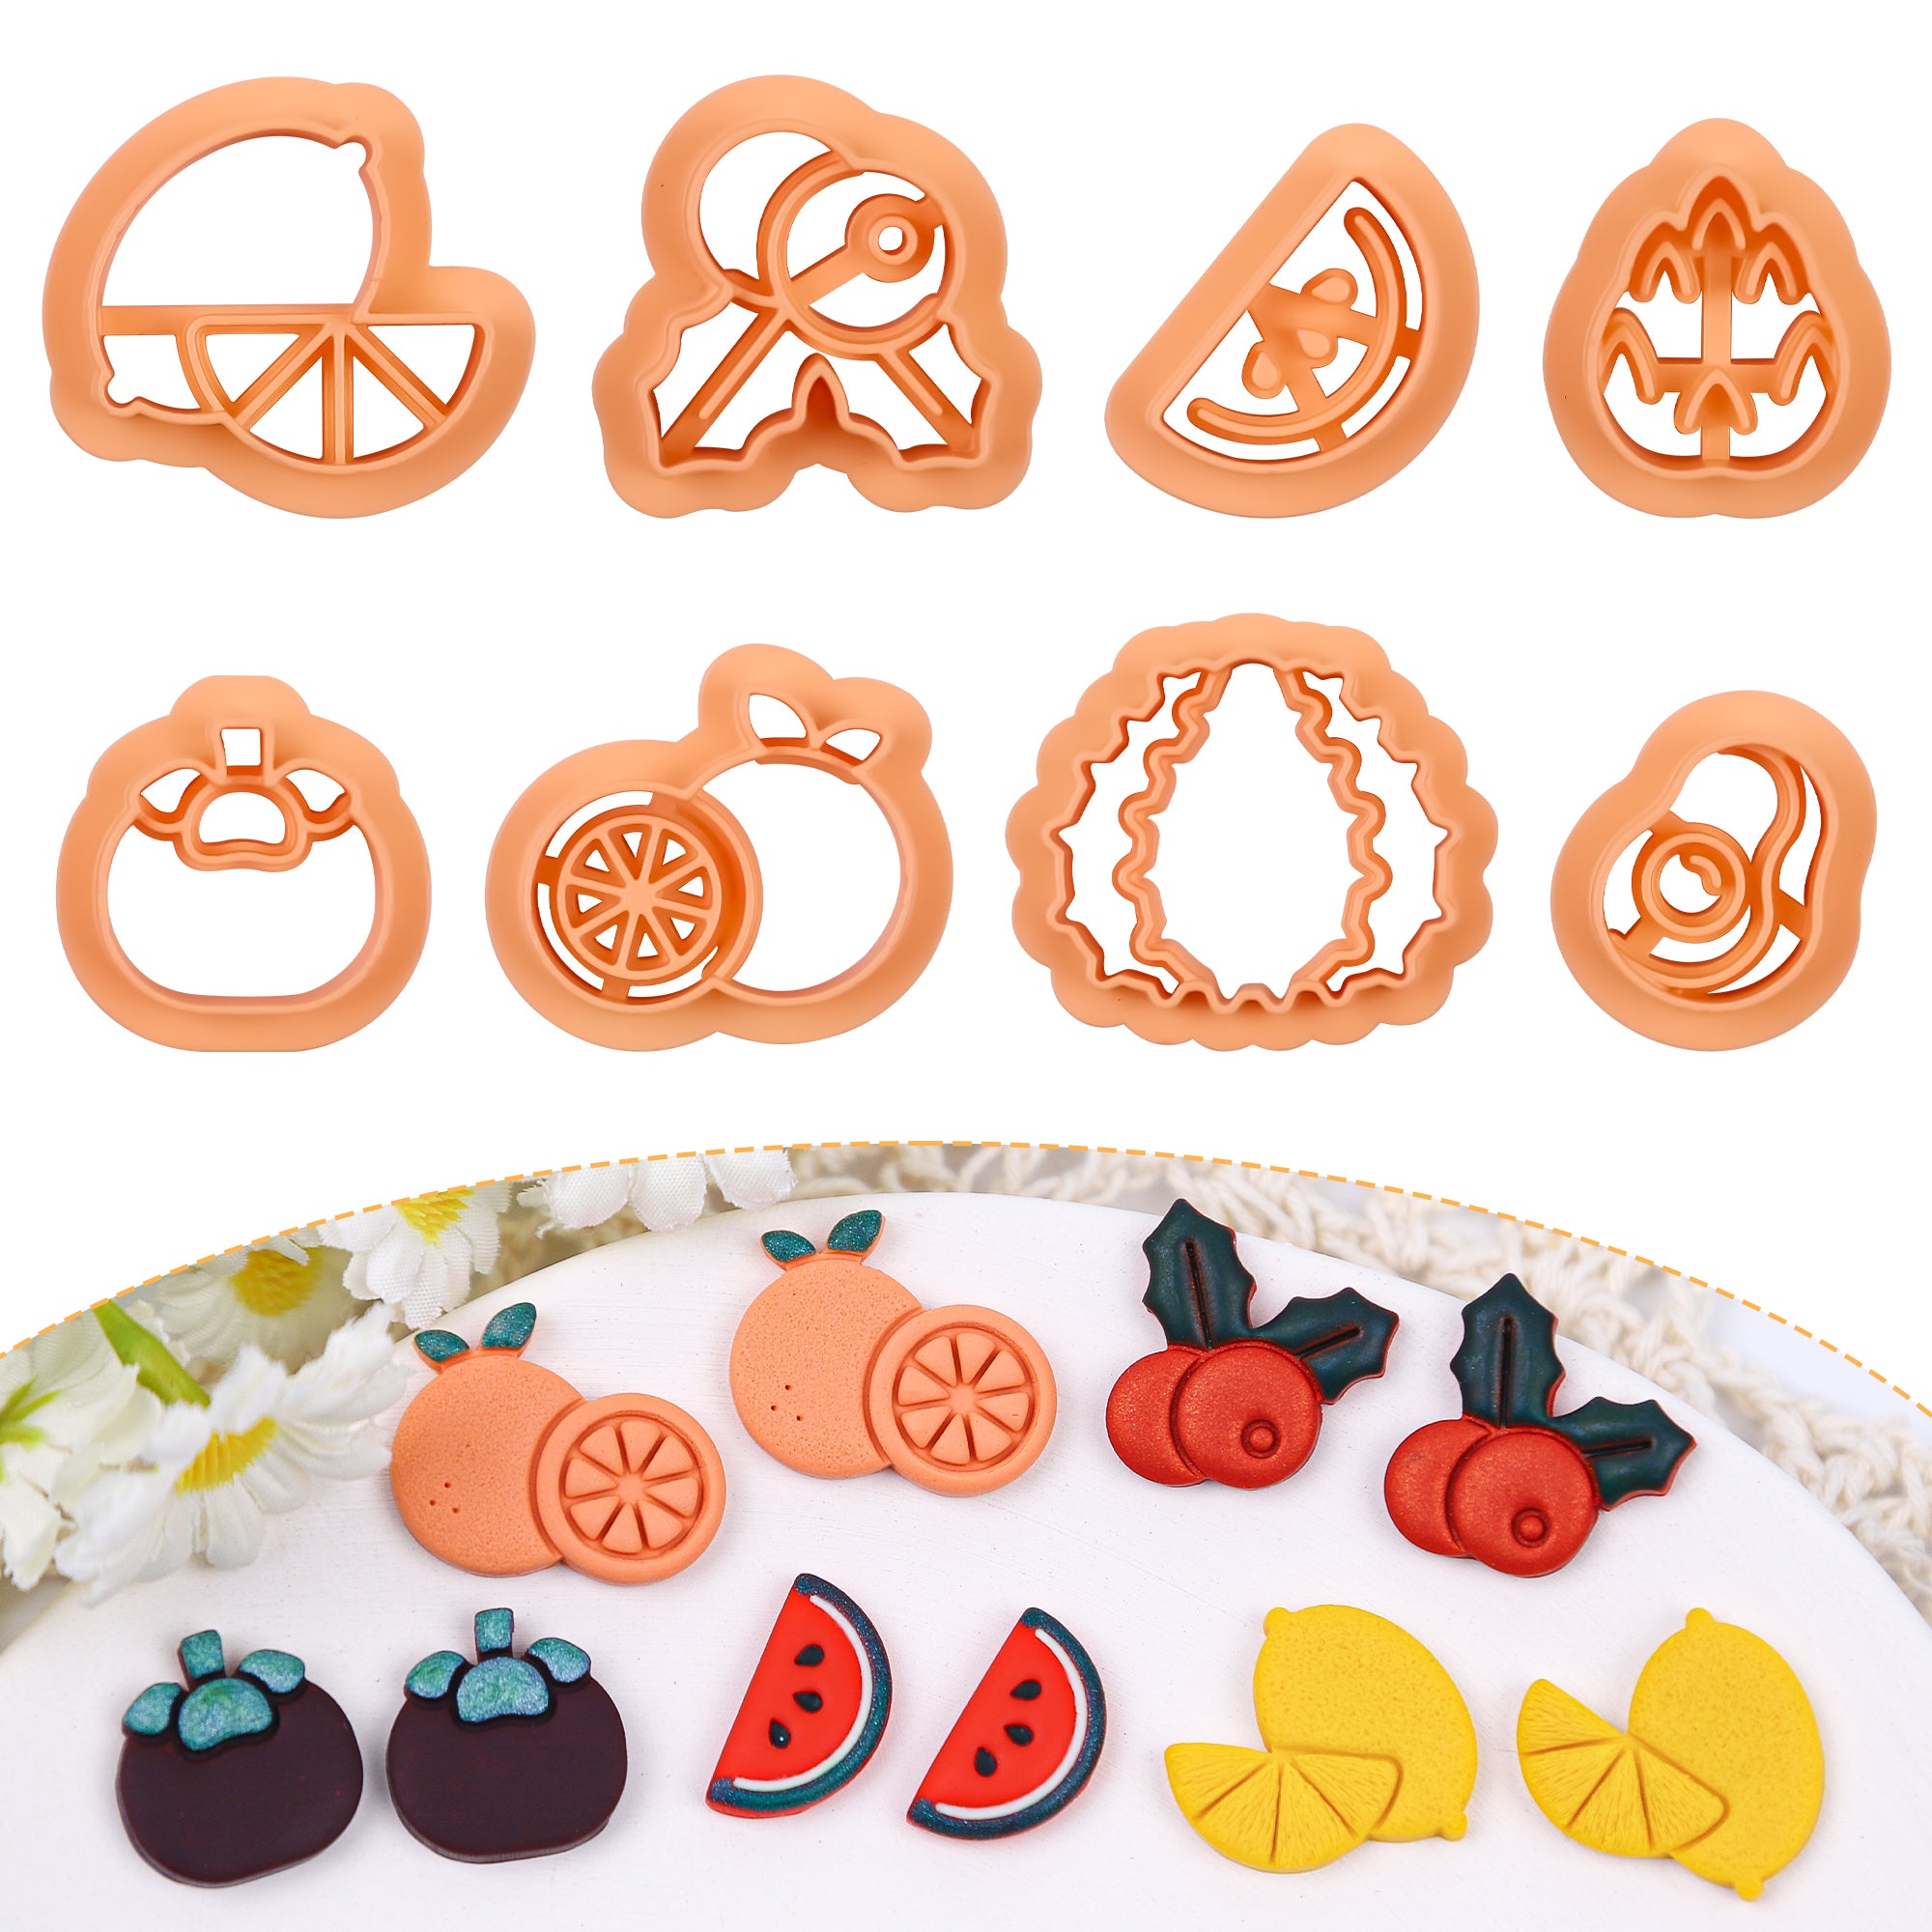  Puocaon Sports Polymer Clay Cutters - 16 Pcs Clay